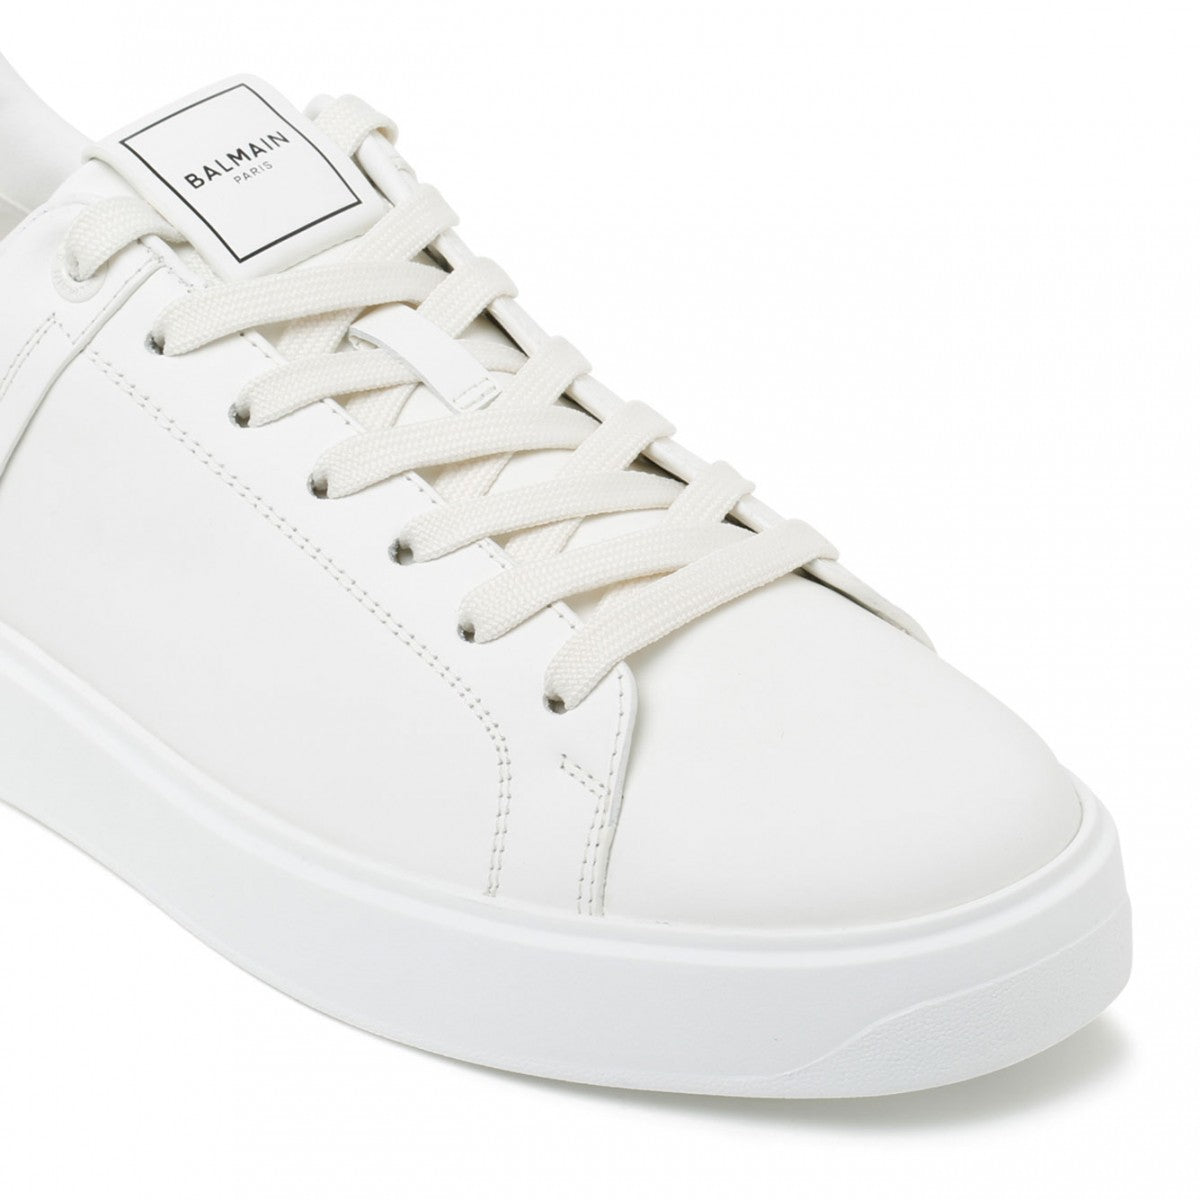 LAB BAL Full White Colour Mens Sports Sneakers Shoes Premium Quality With Box 19951591